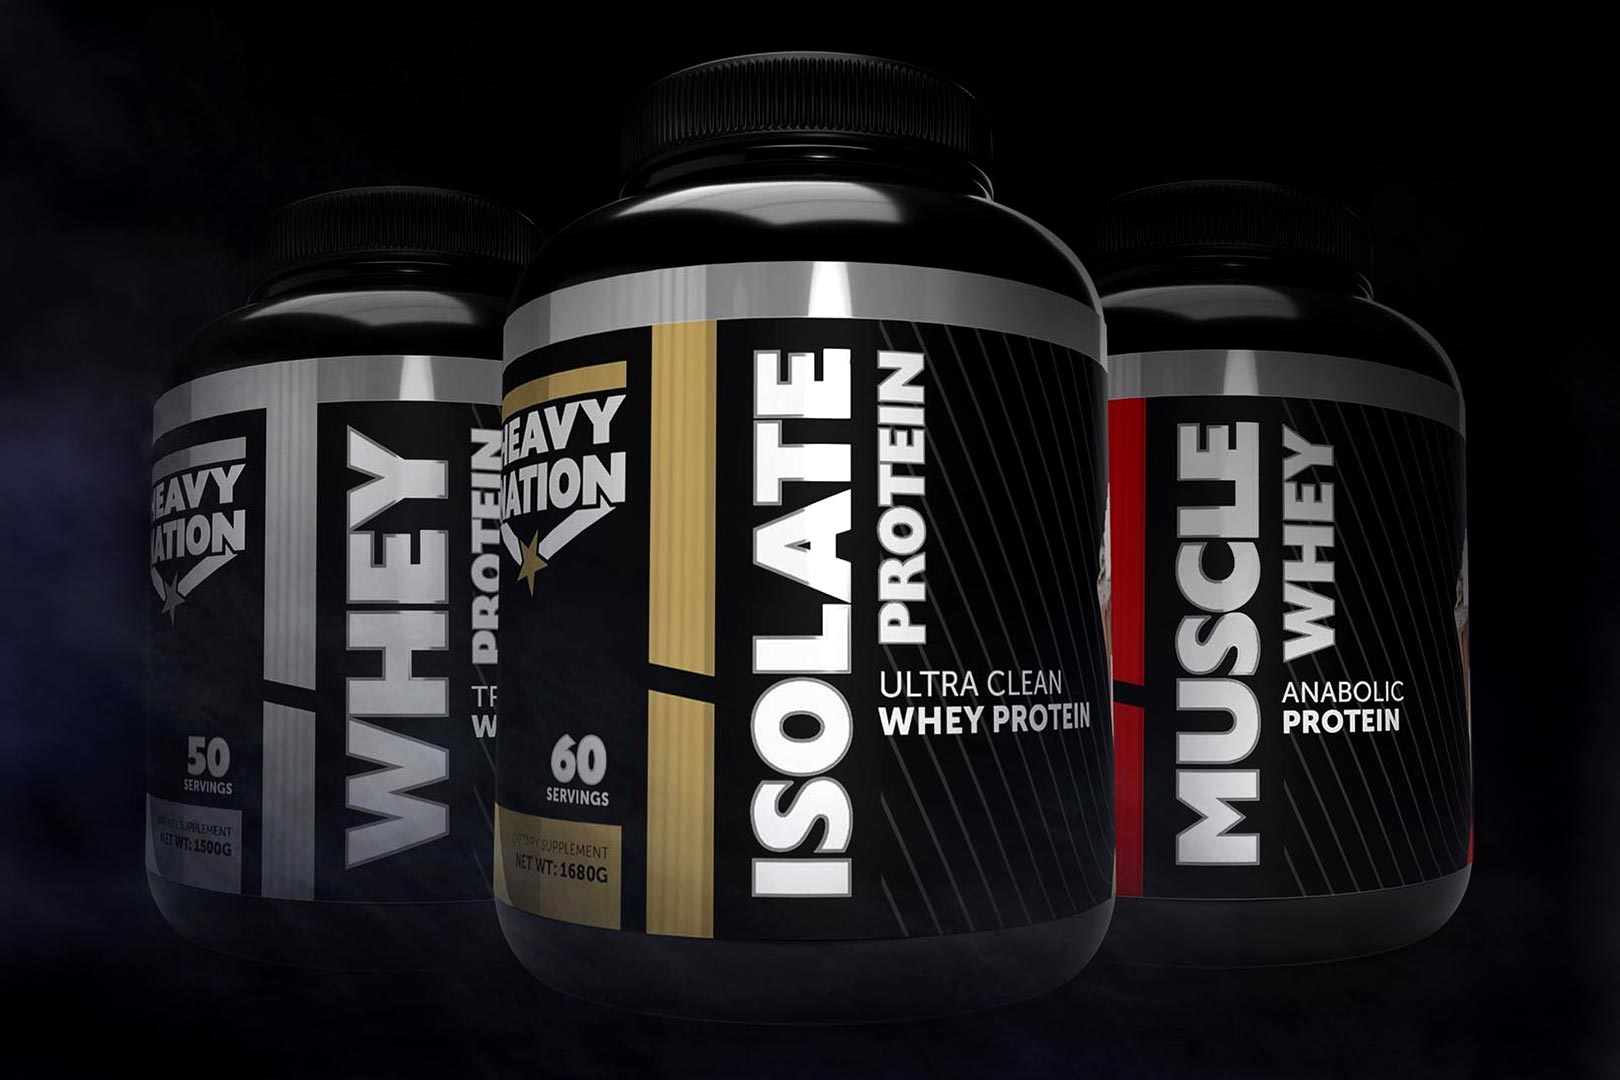 Heavy Nation Family Of Protein Powders